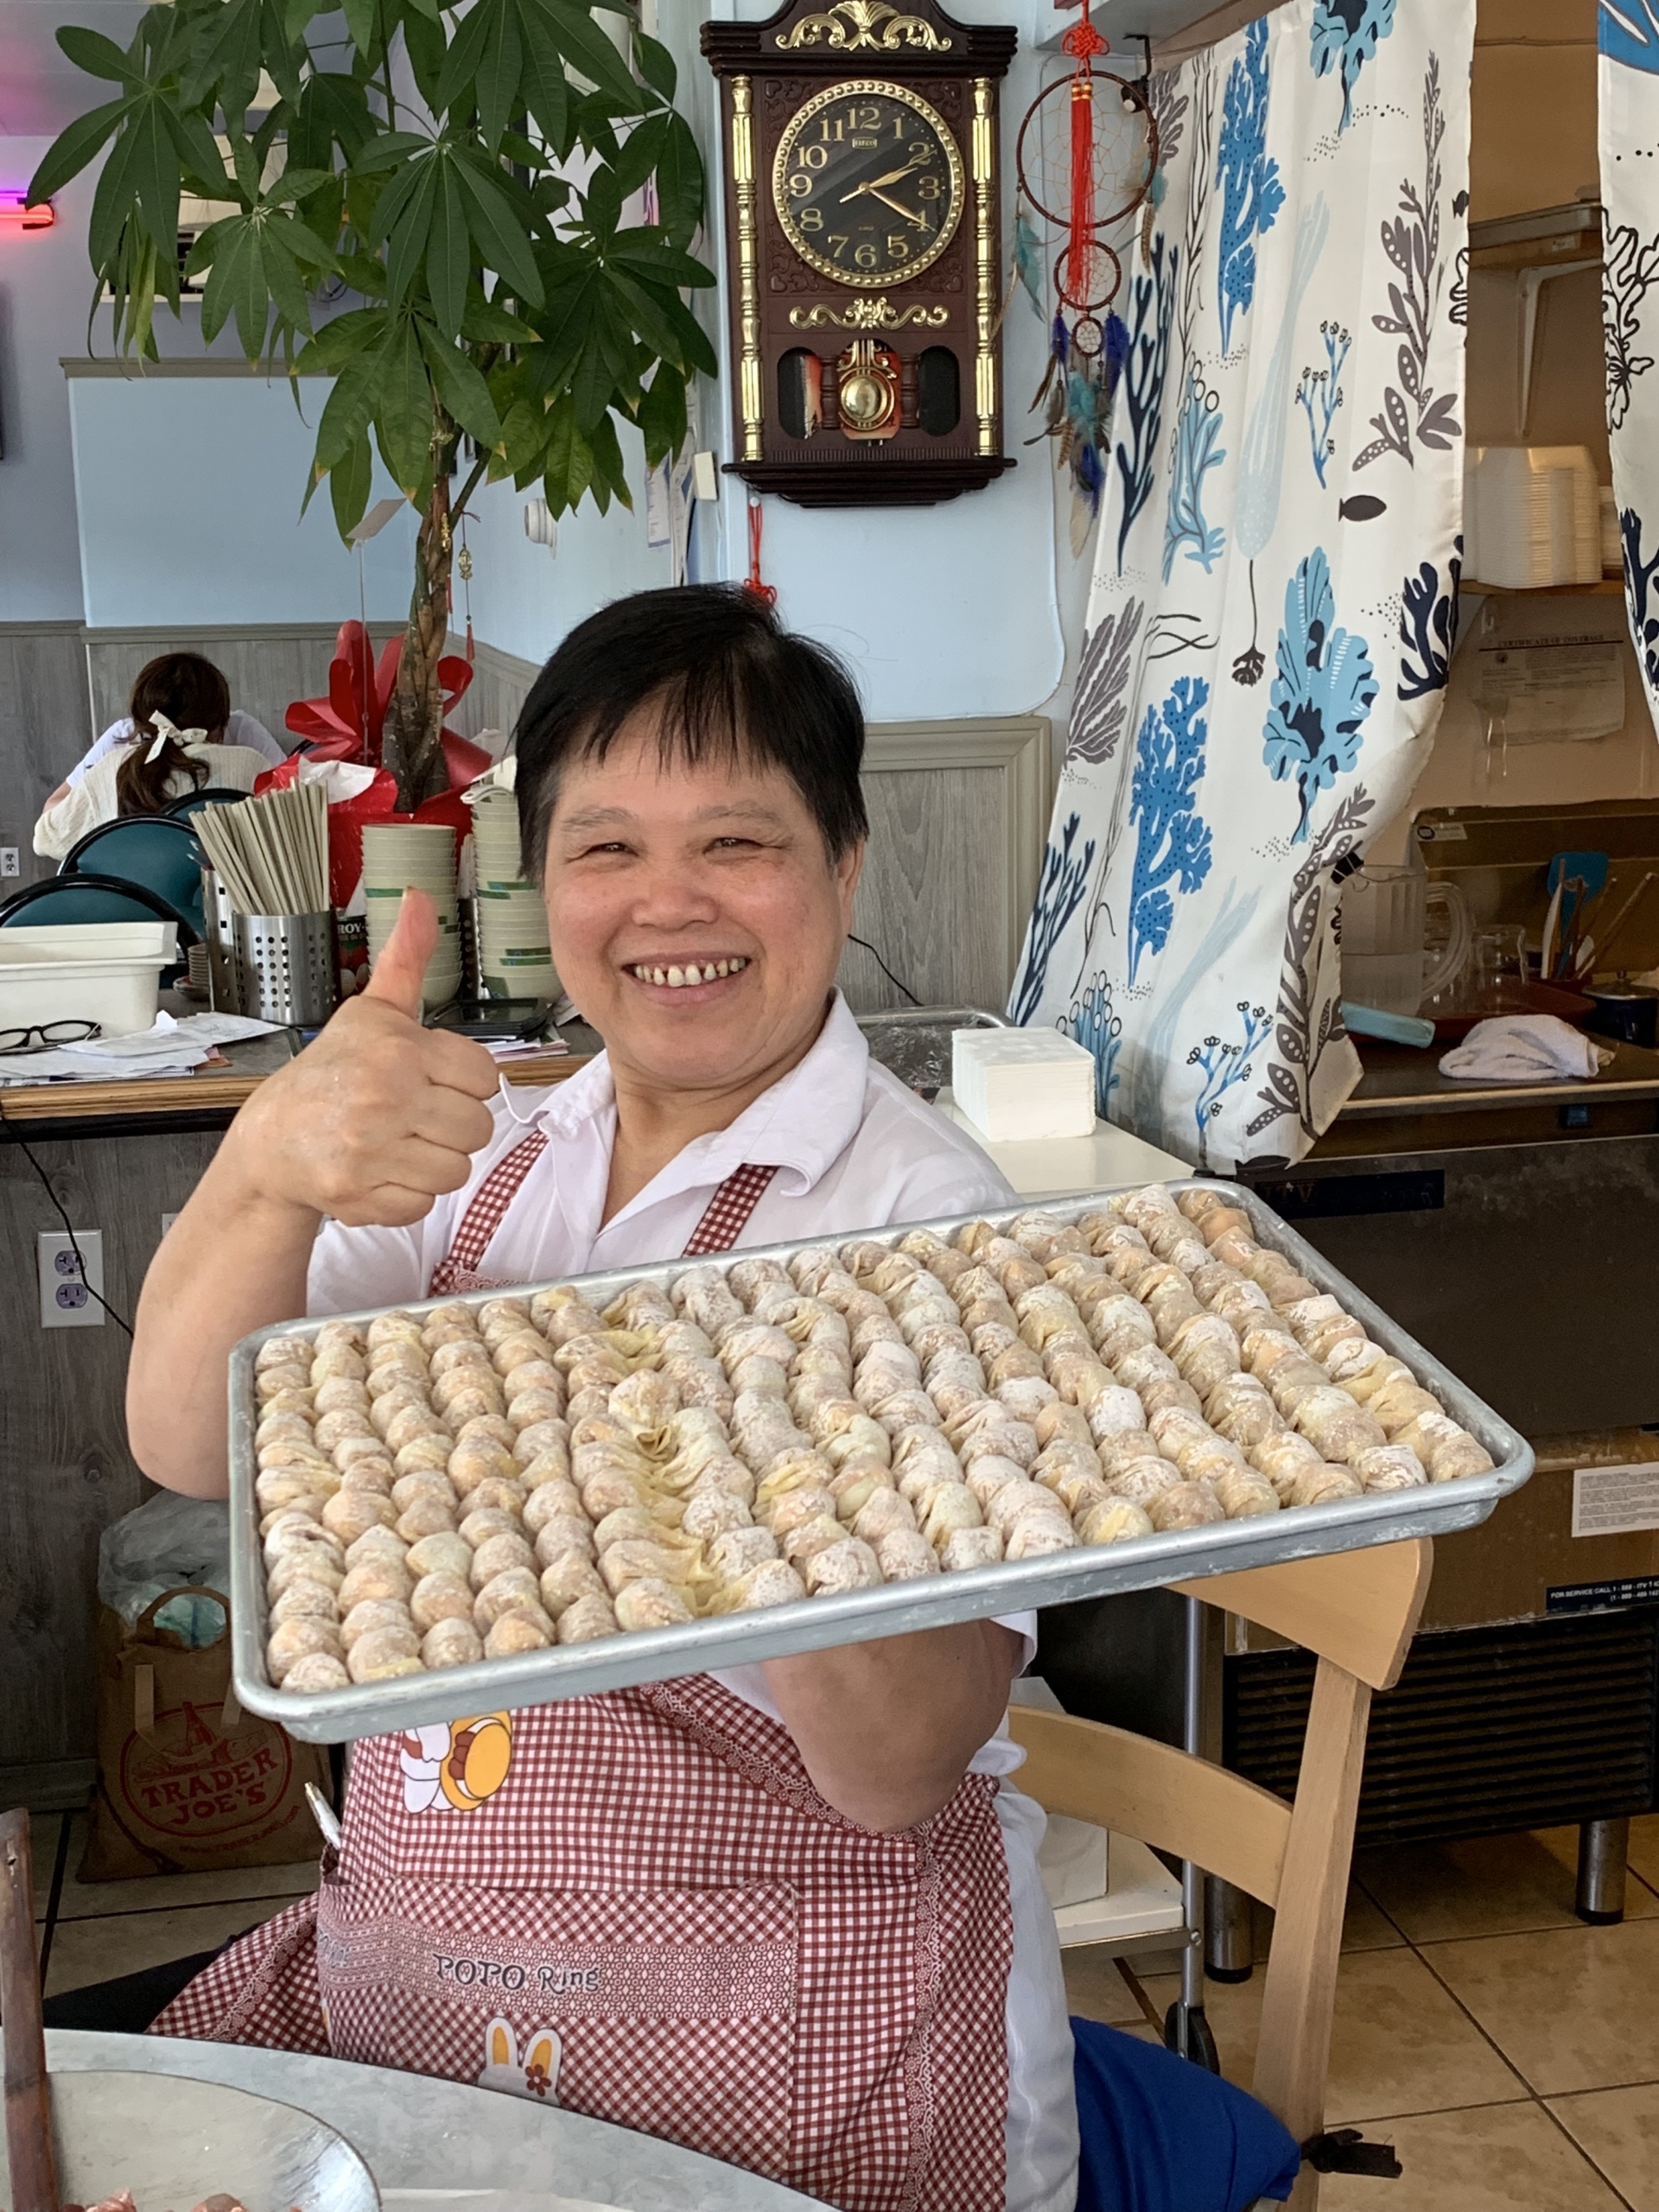 Owner Qiping Ng holds a tray of freshly made wontons and gives the thumbs up sign.